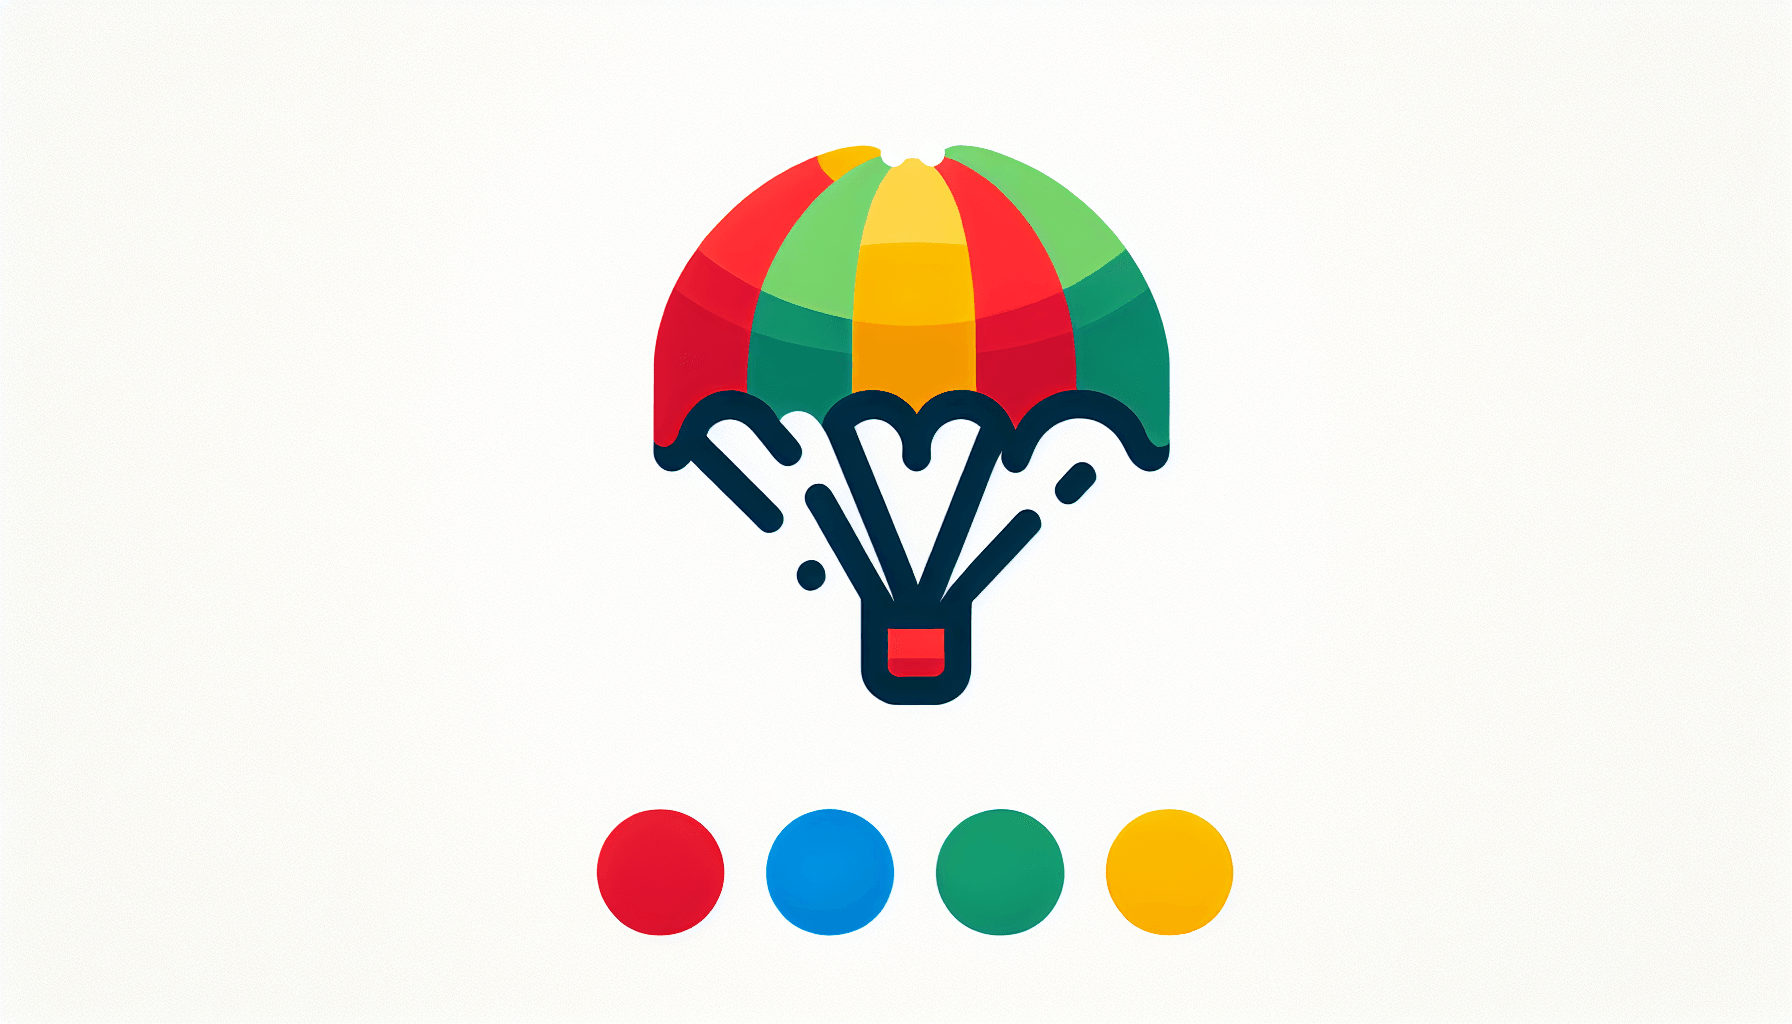 Parachute in flat illustration style and white background, red #f47574, green #88c7a8, yellow #fcc44b, and blue #645bc8 colors.